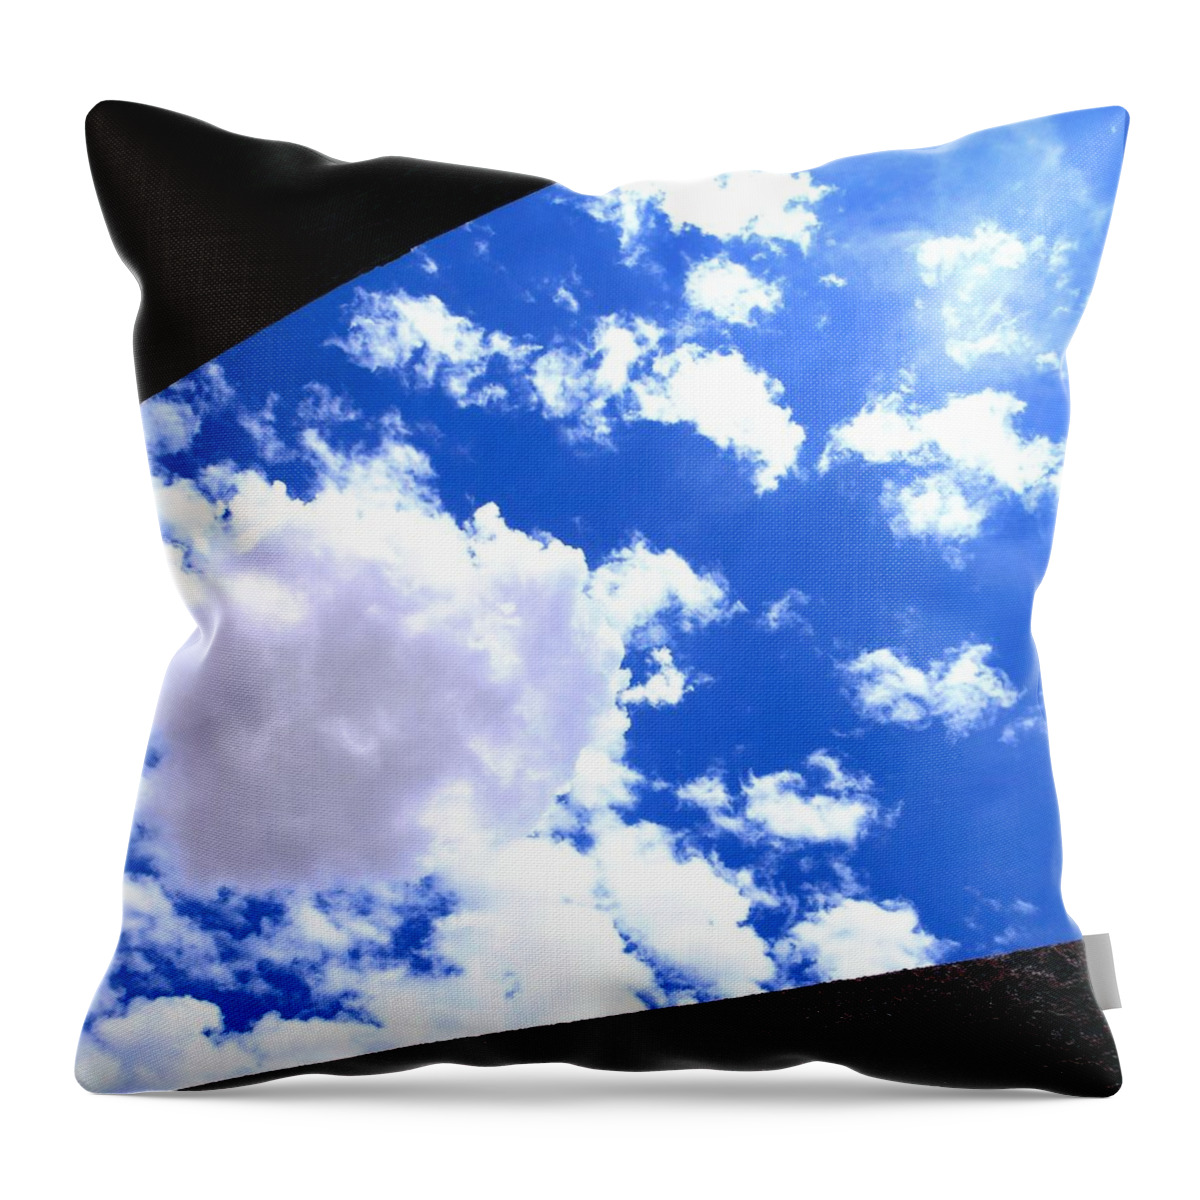 Clouds Throw Pillow featuring the photograph The Opening Square by Dietmar Scherf